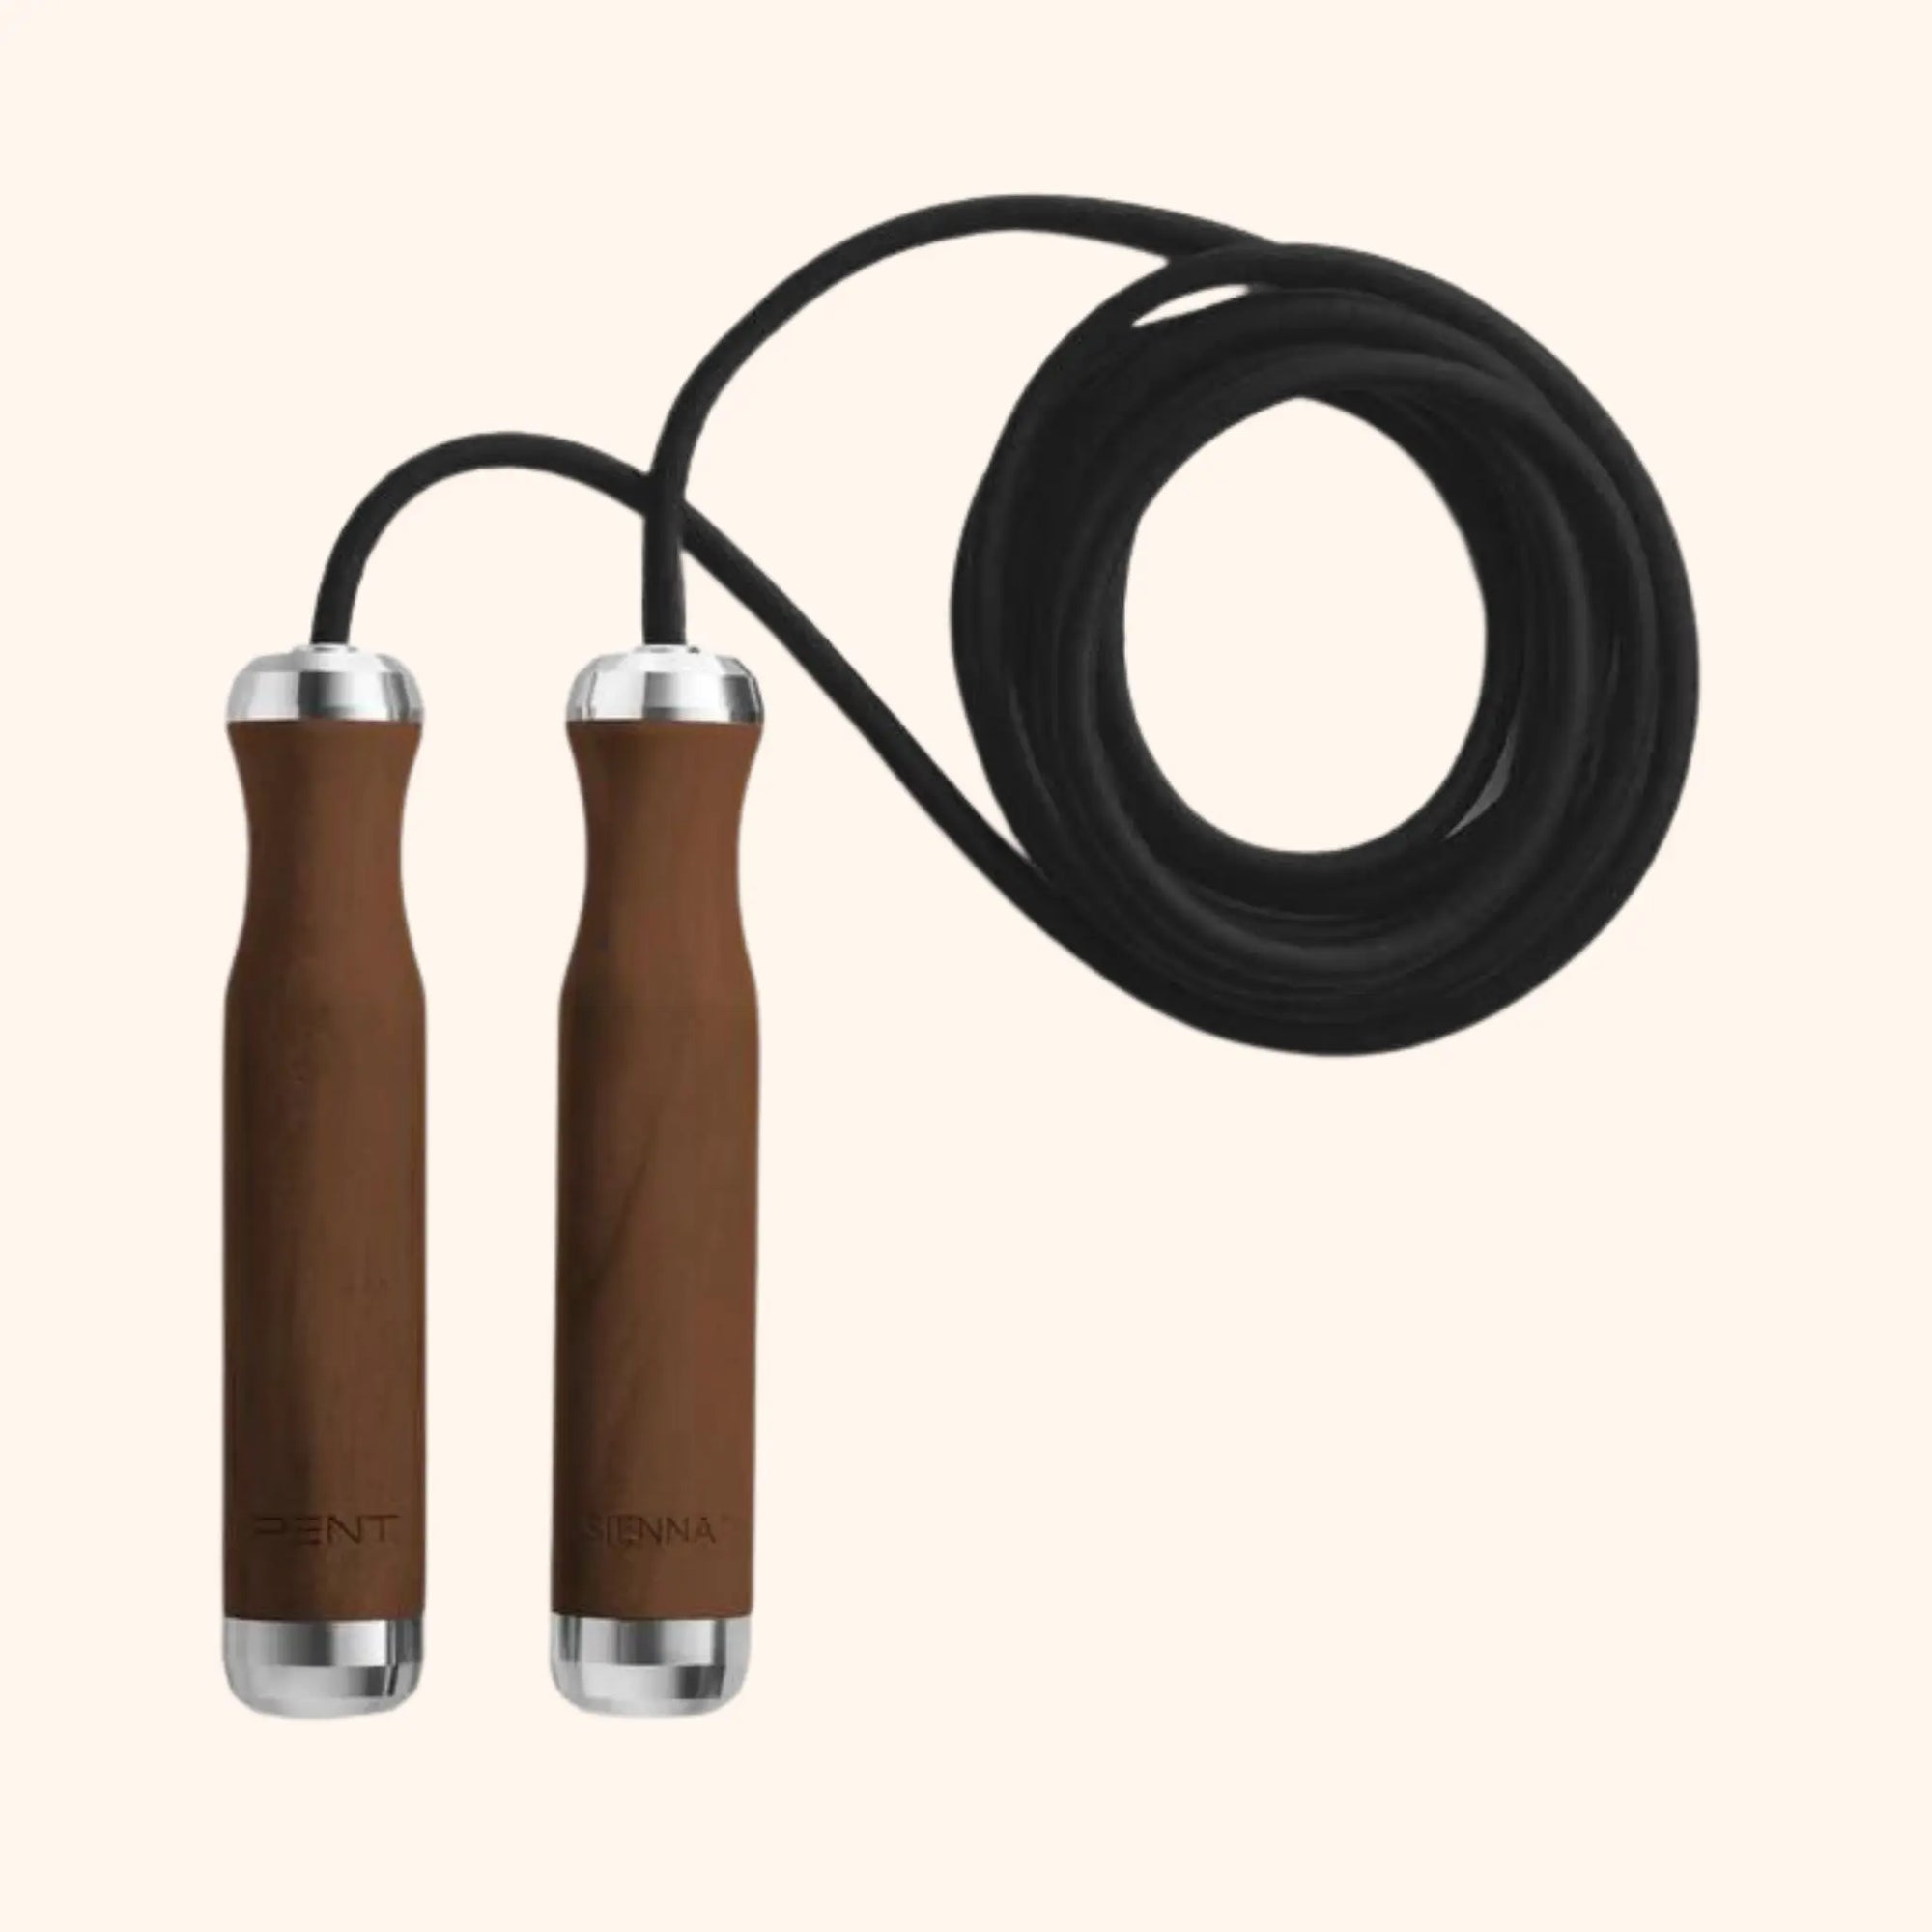 PENT | SIENNA - Luxury Wood and Steel Skipping Rope PENT